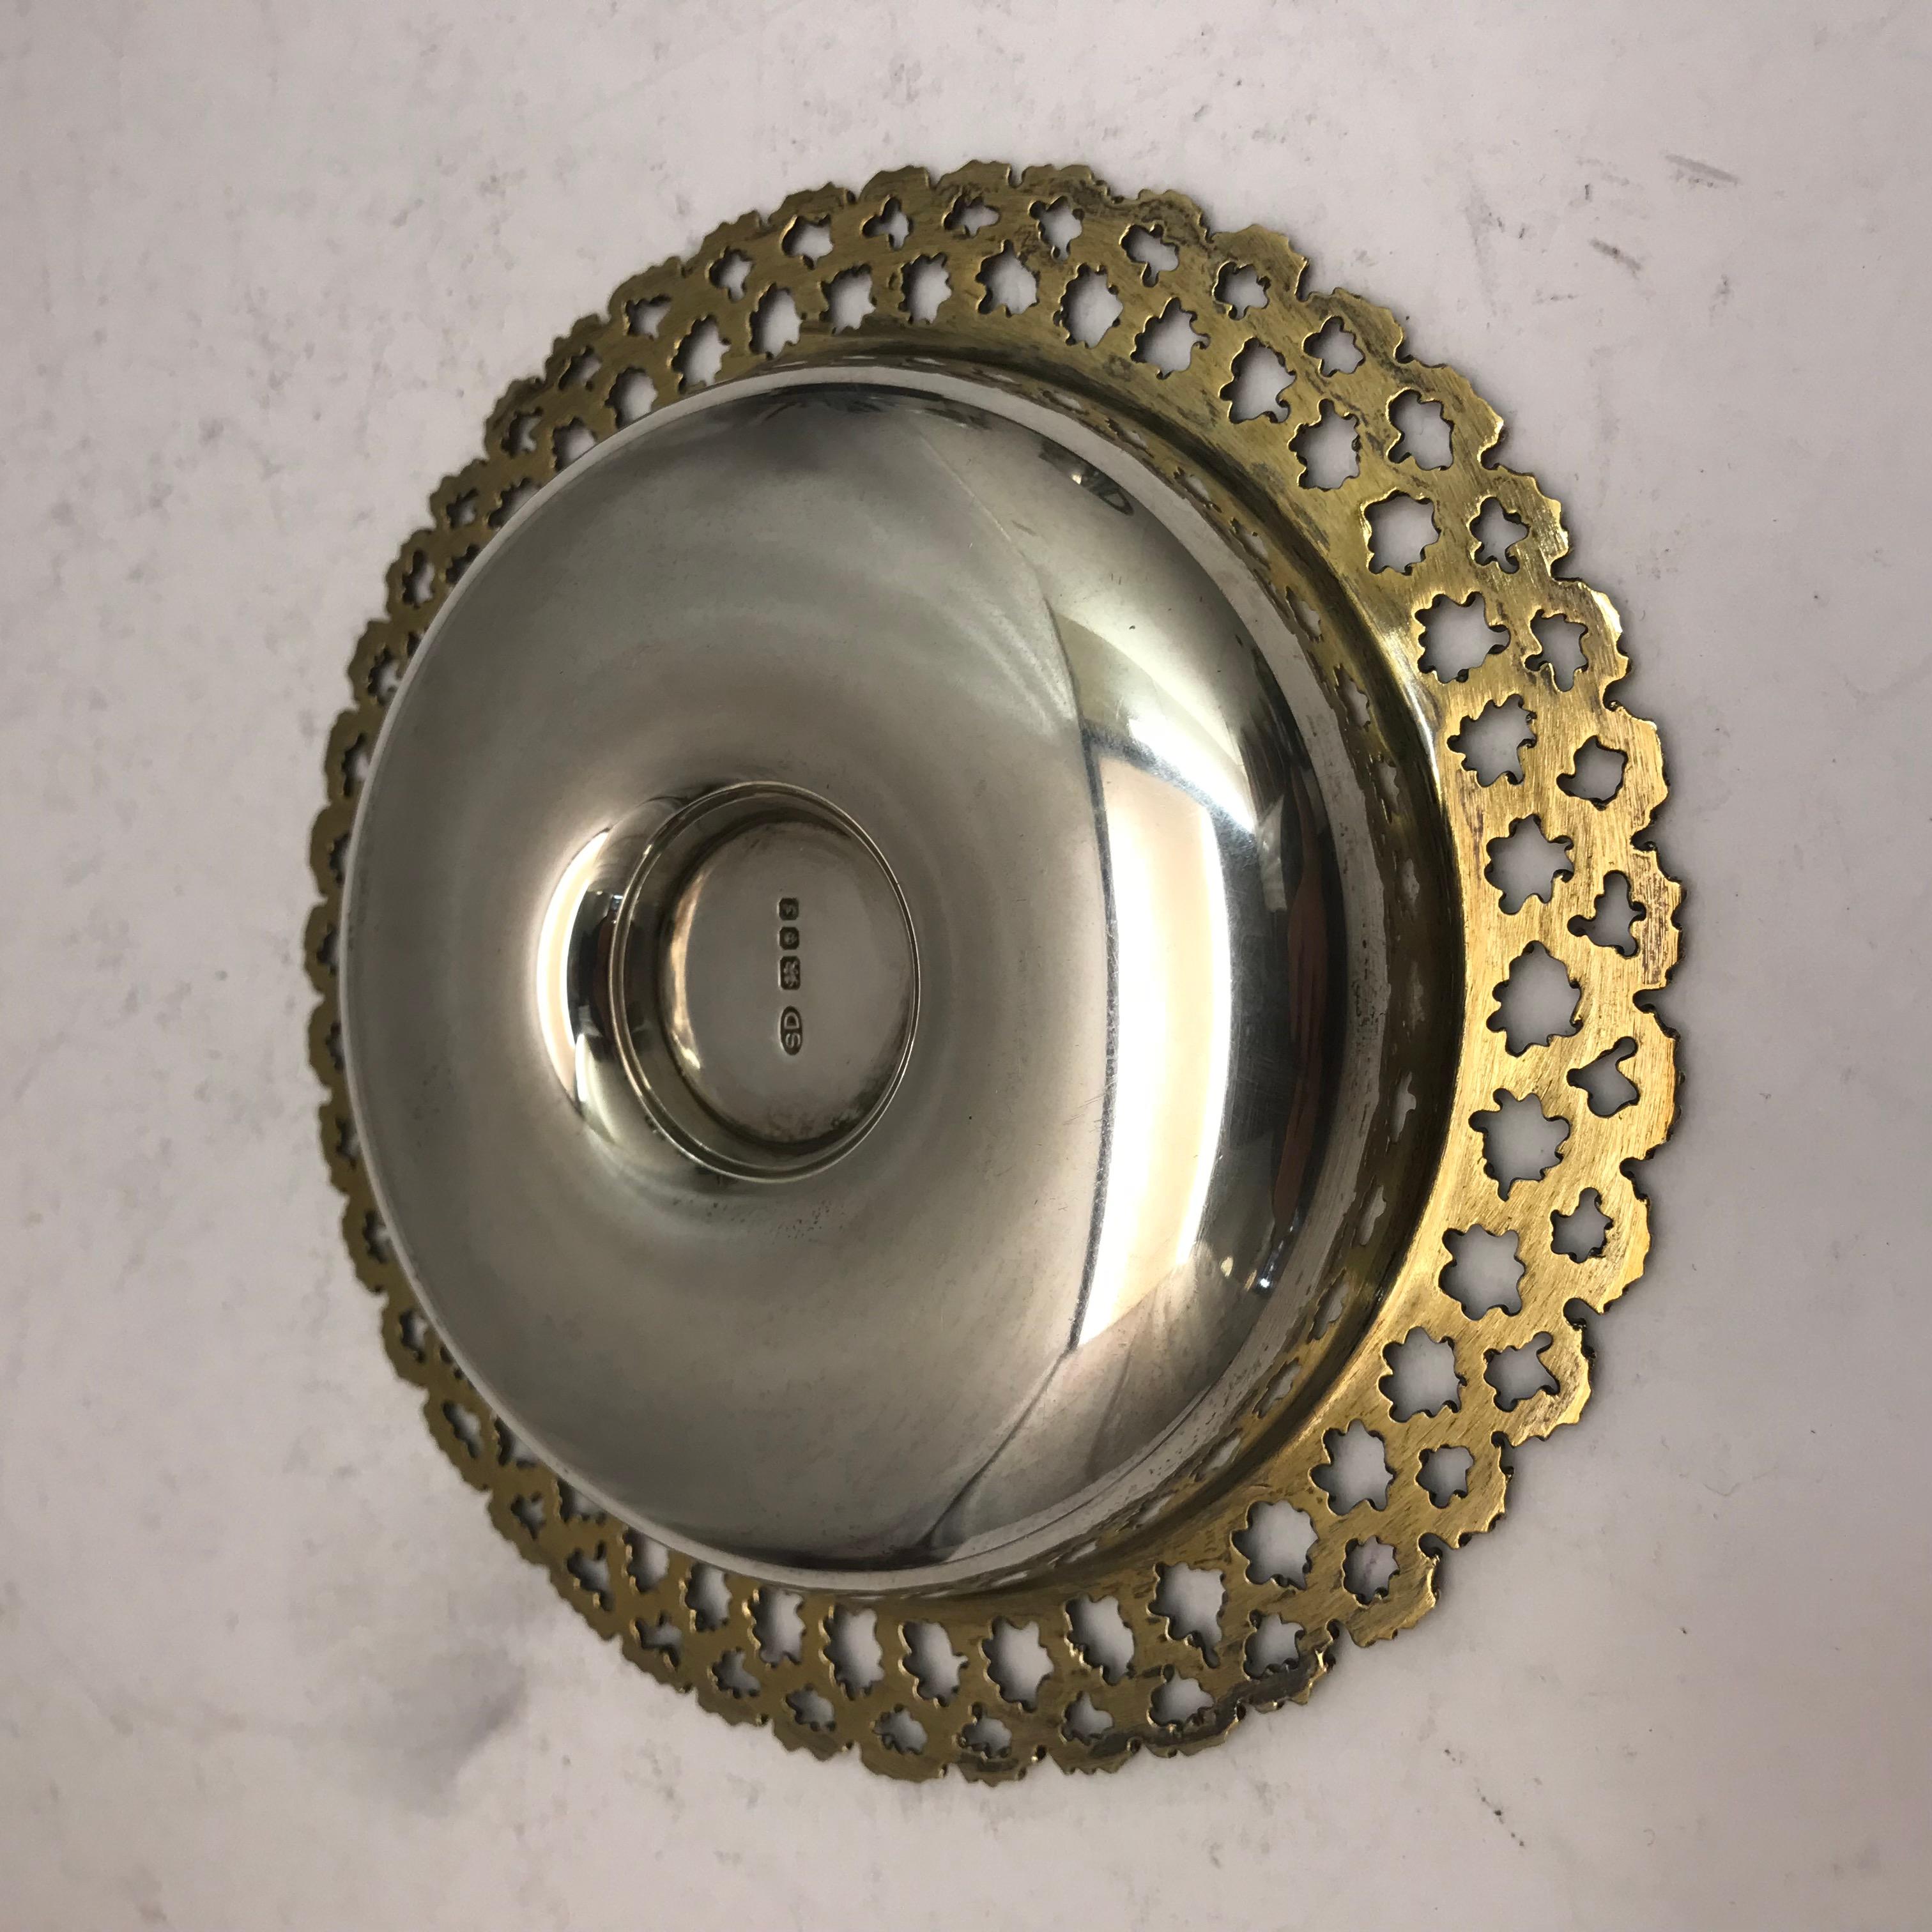 English Silver Commemoration Dish to Celebrate Charle's and Dianna's 1981 Wedding For Sale